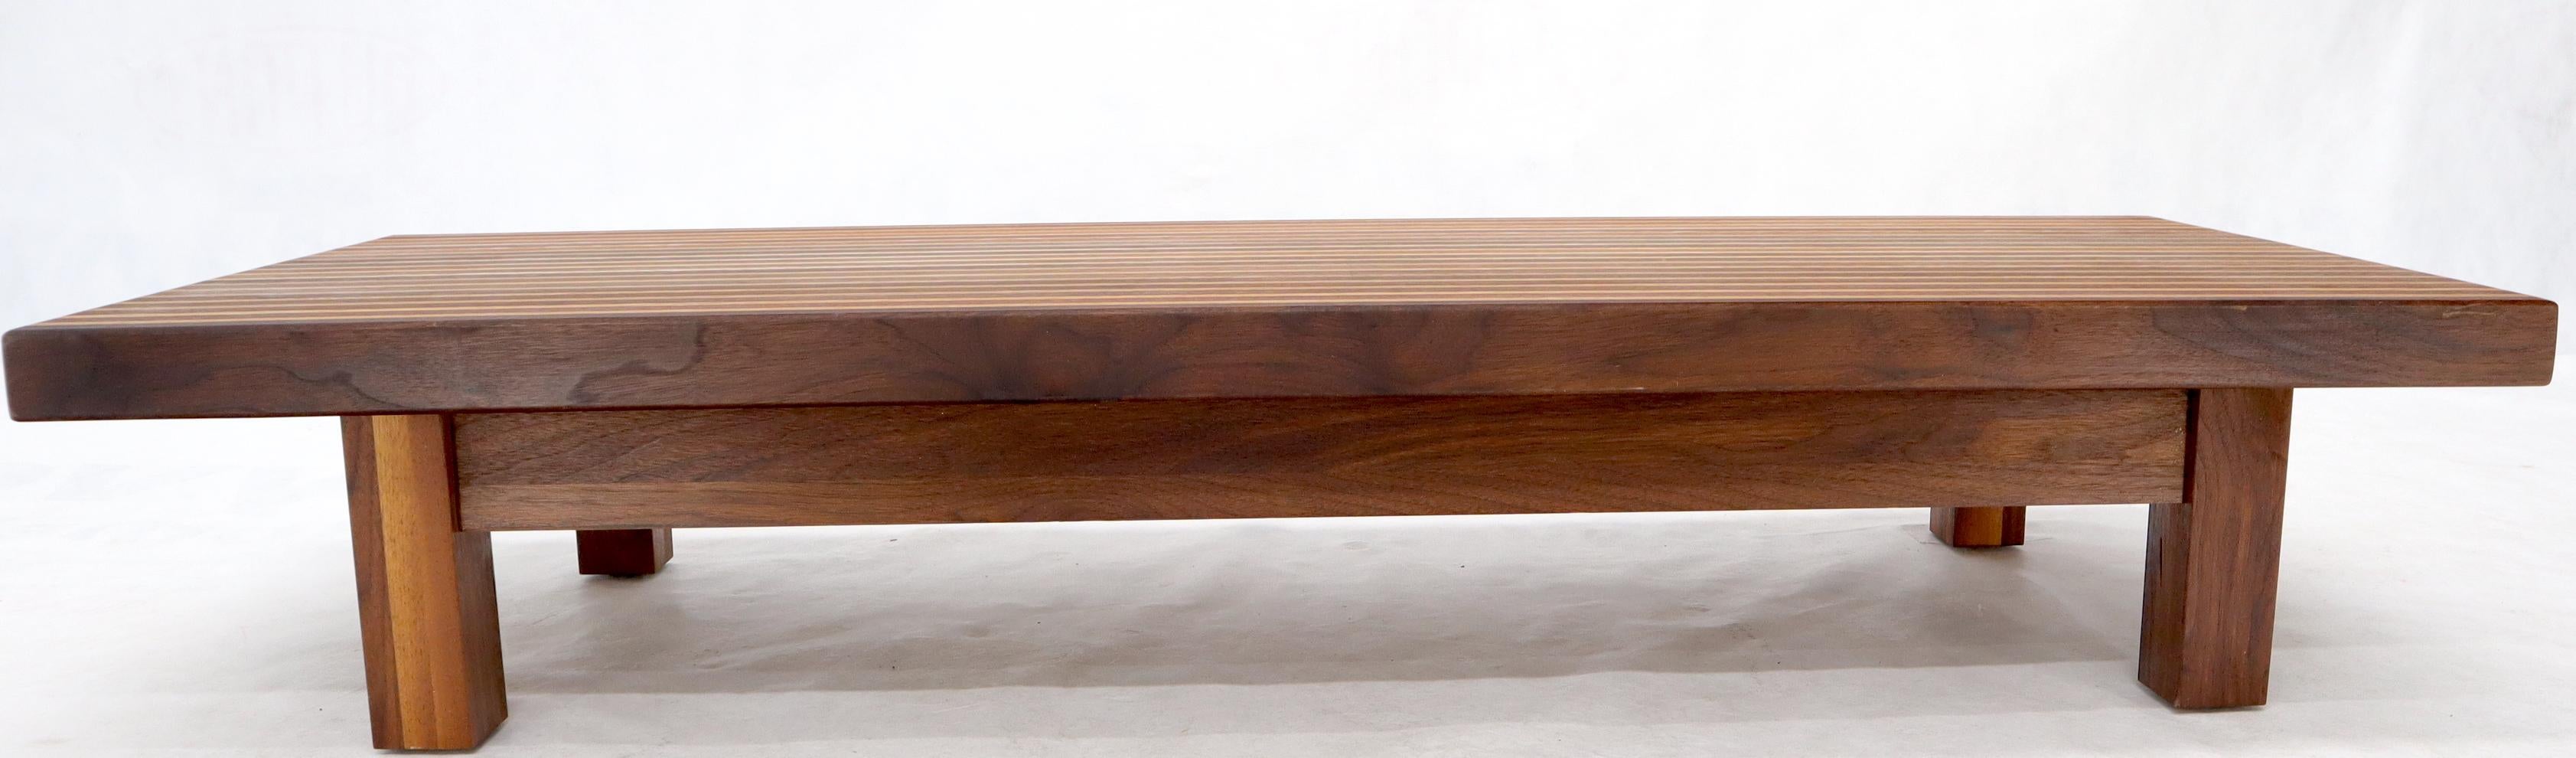 Unknown Solid Block Walnut and Oak Rectangular Low Coffee Table